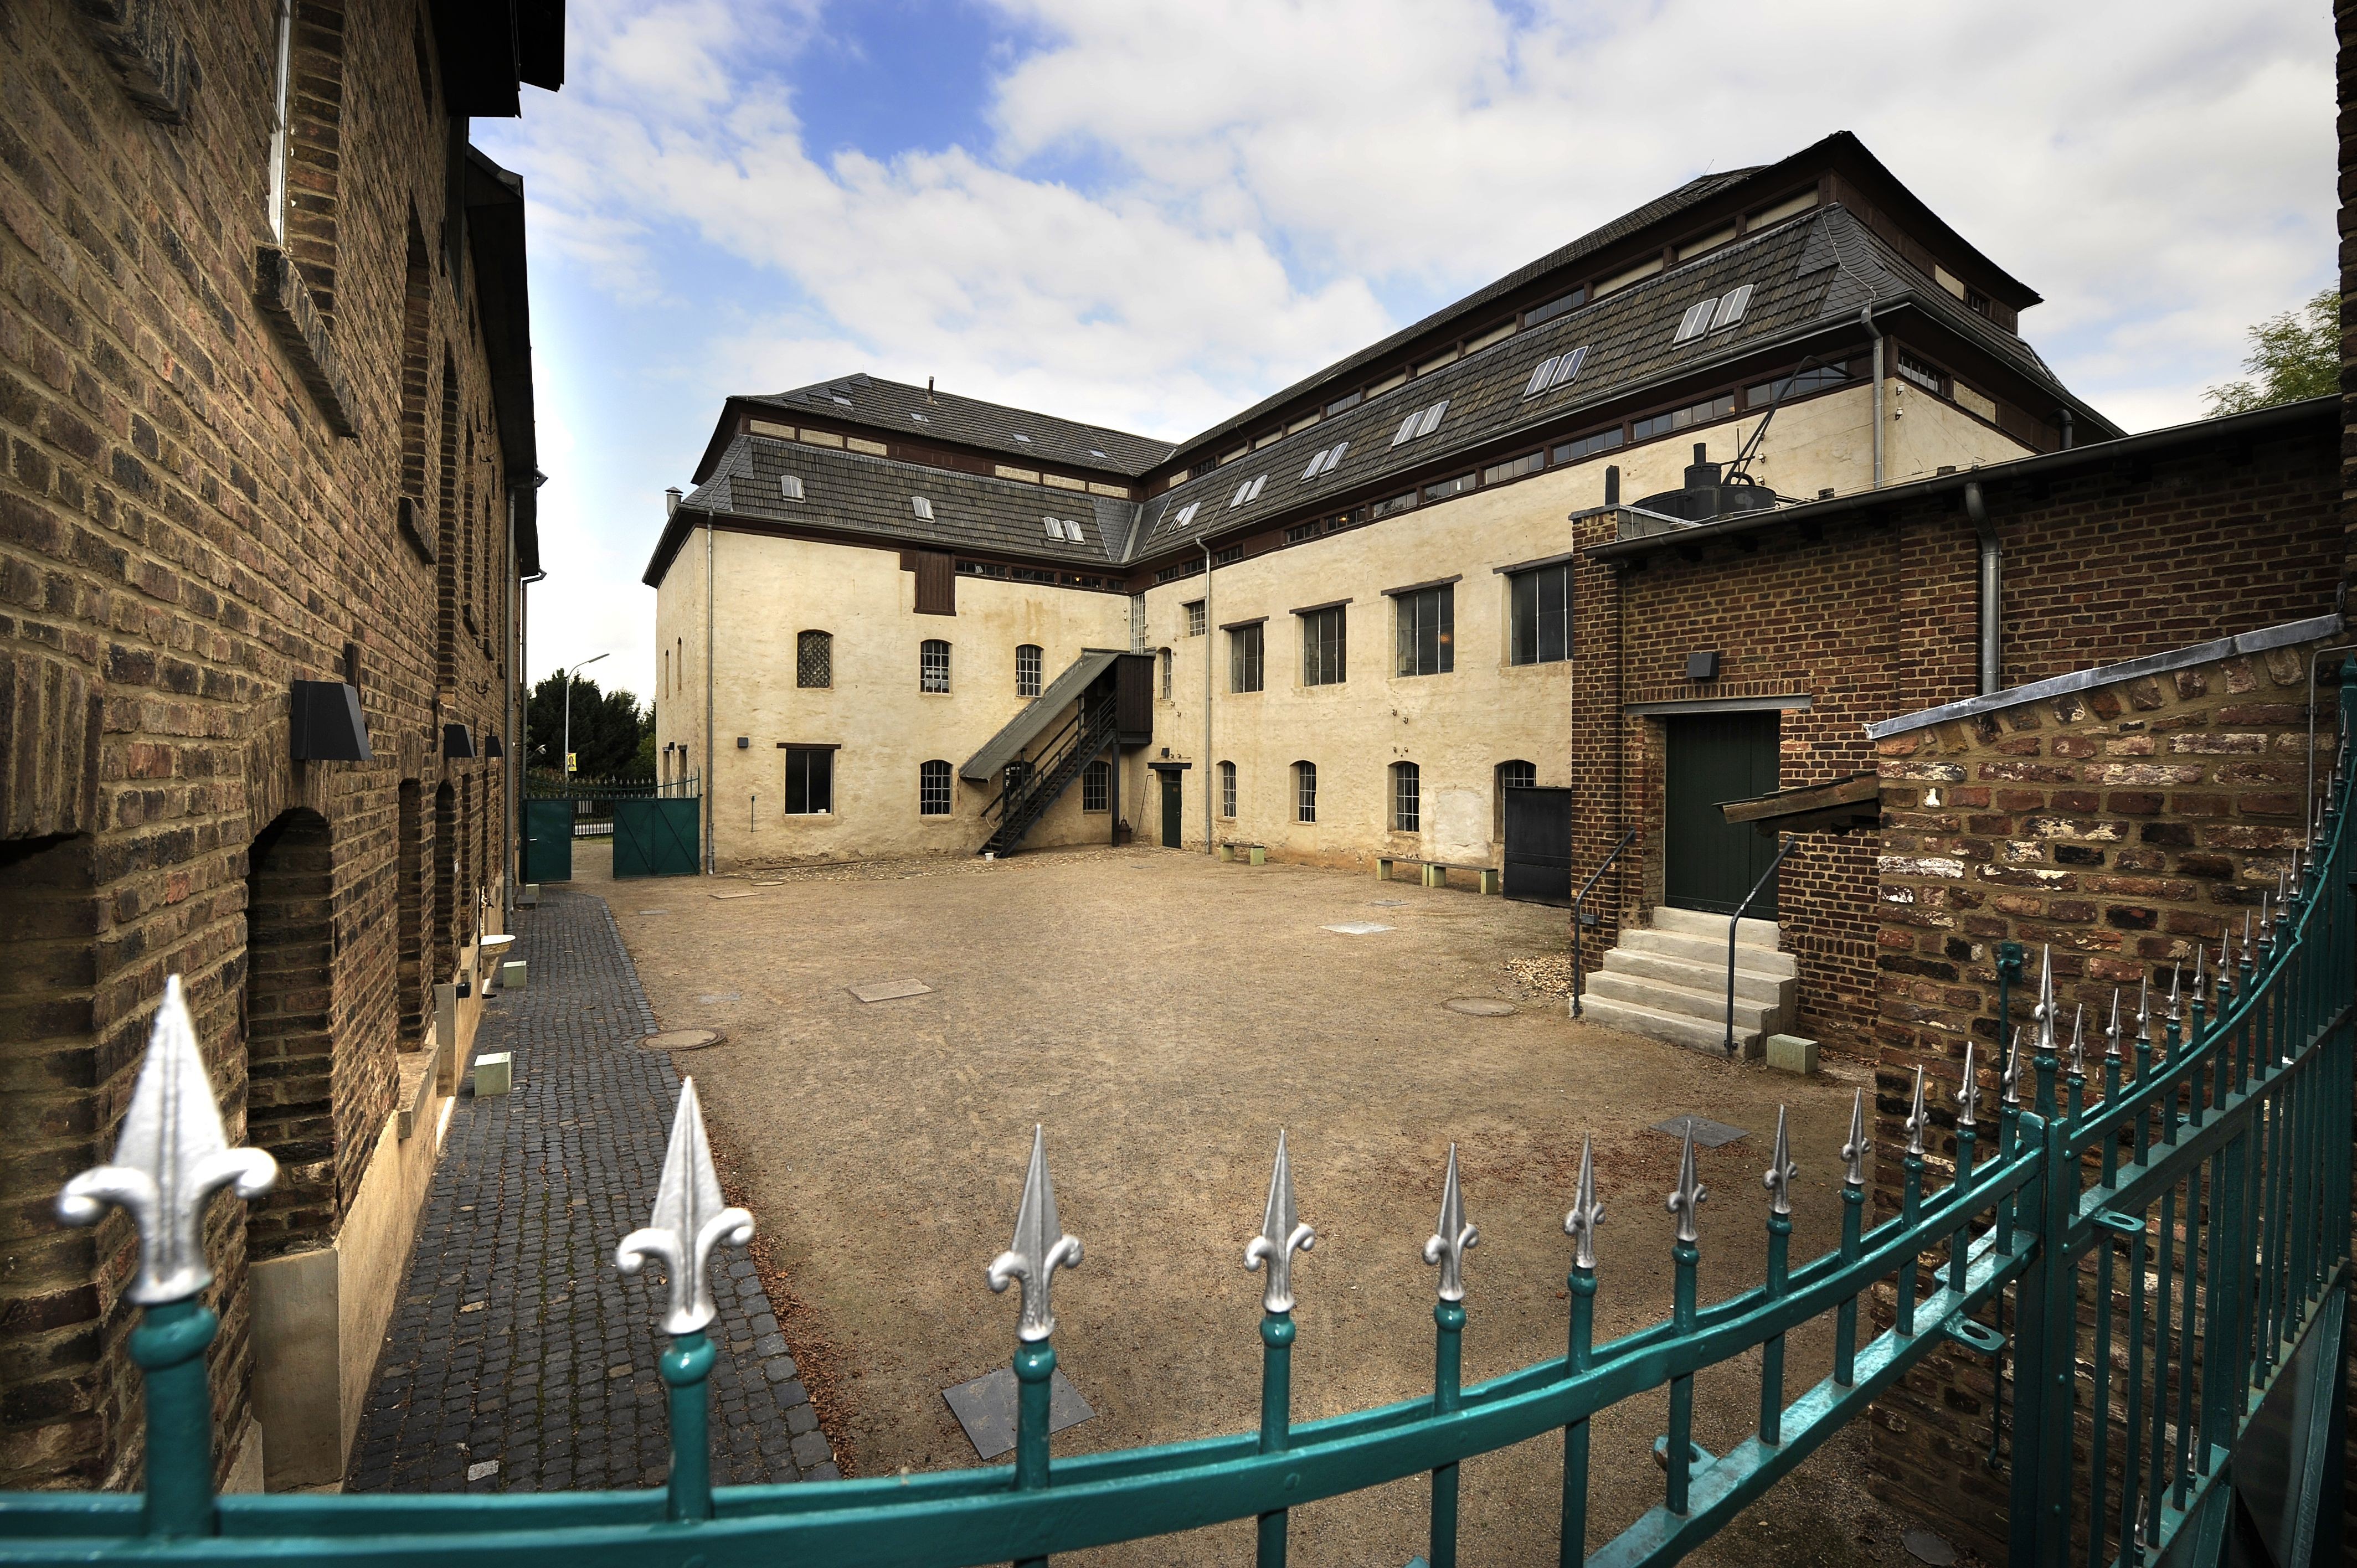 Factory courtyard of the Tuchfabrik Müller (Cloth Factory) – with the main building constructed in 1801 as a paper mill (Photo: Jürgen Hoffmann)